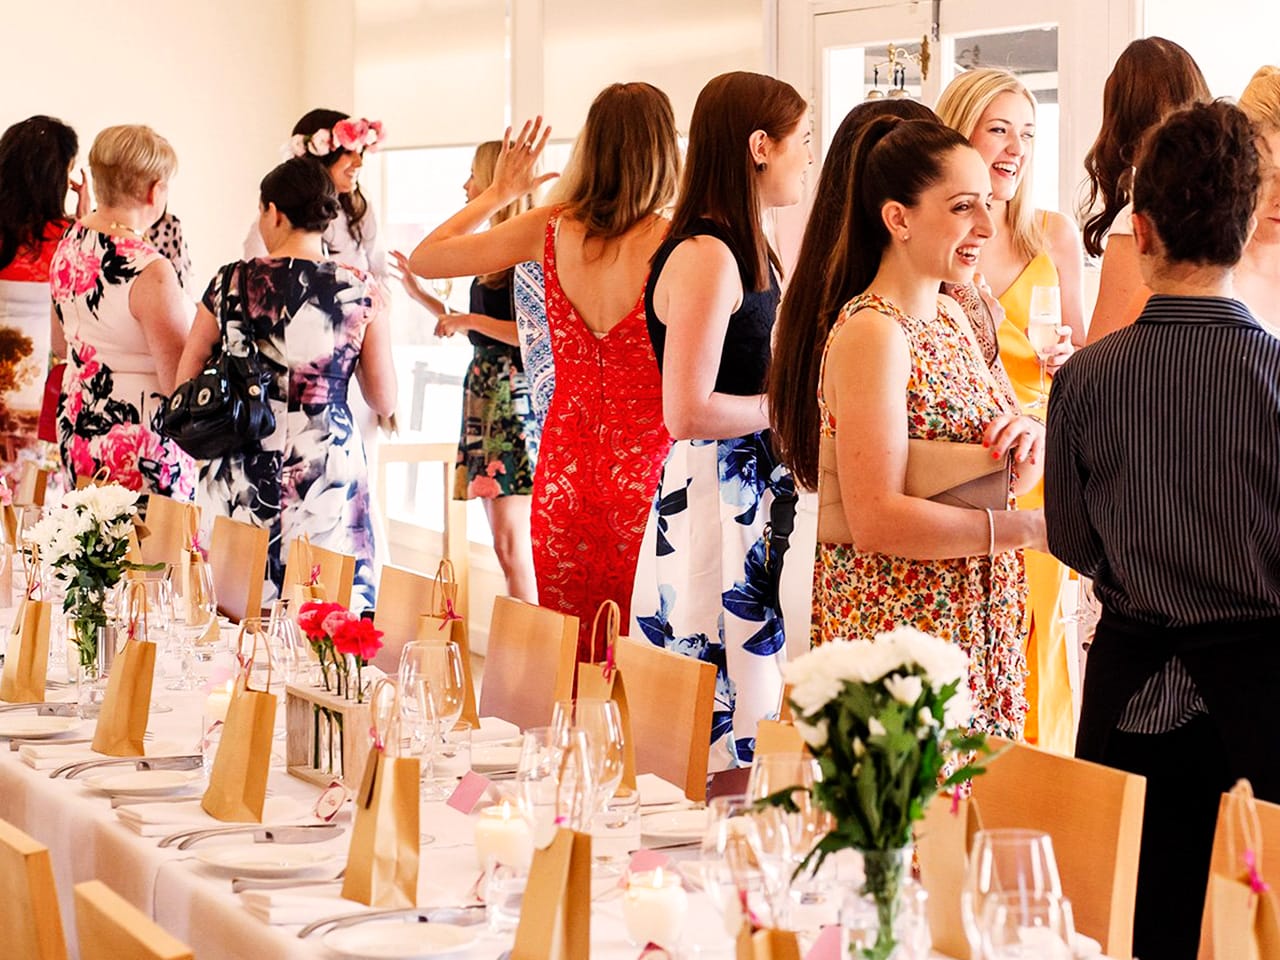 Guests Enjoying Inside The Function Room With A Long Table